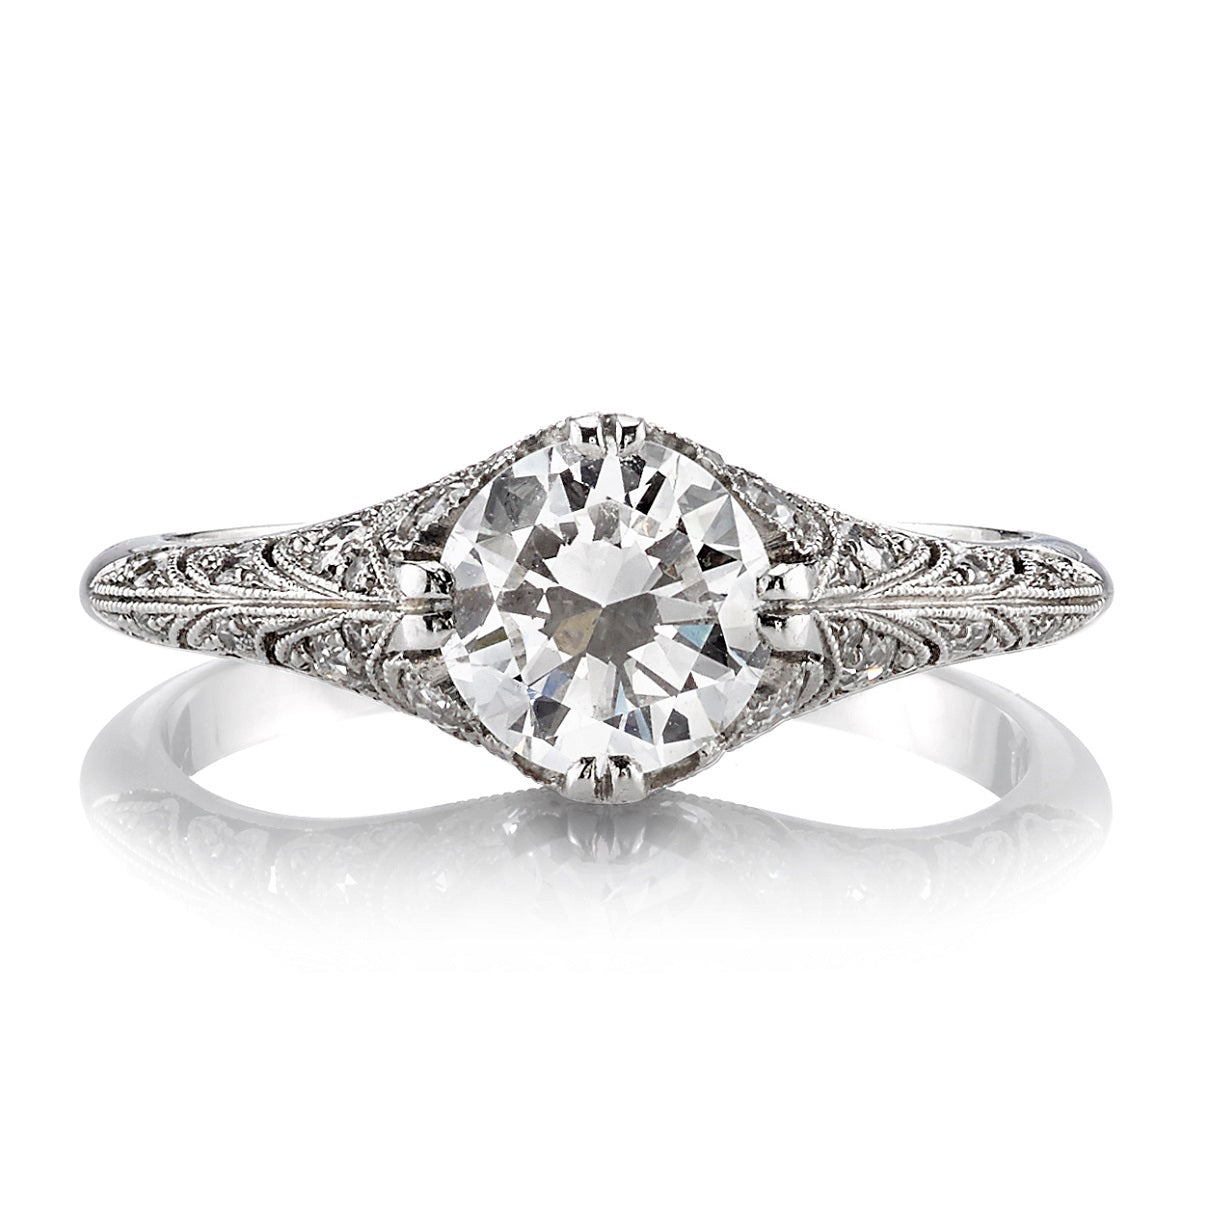 SINGLE STONE CHARLOTTE RING featuring 1.04ct I/VS2 EGL certified old European cut diamond with 0.25ctw old European cut accent diamonds set in a handcrafted platinum mounting.